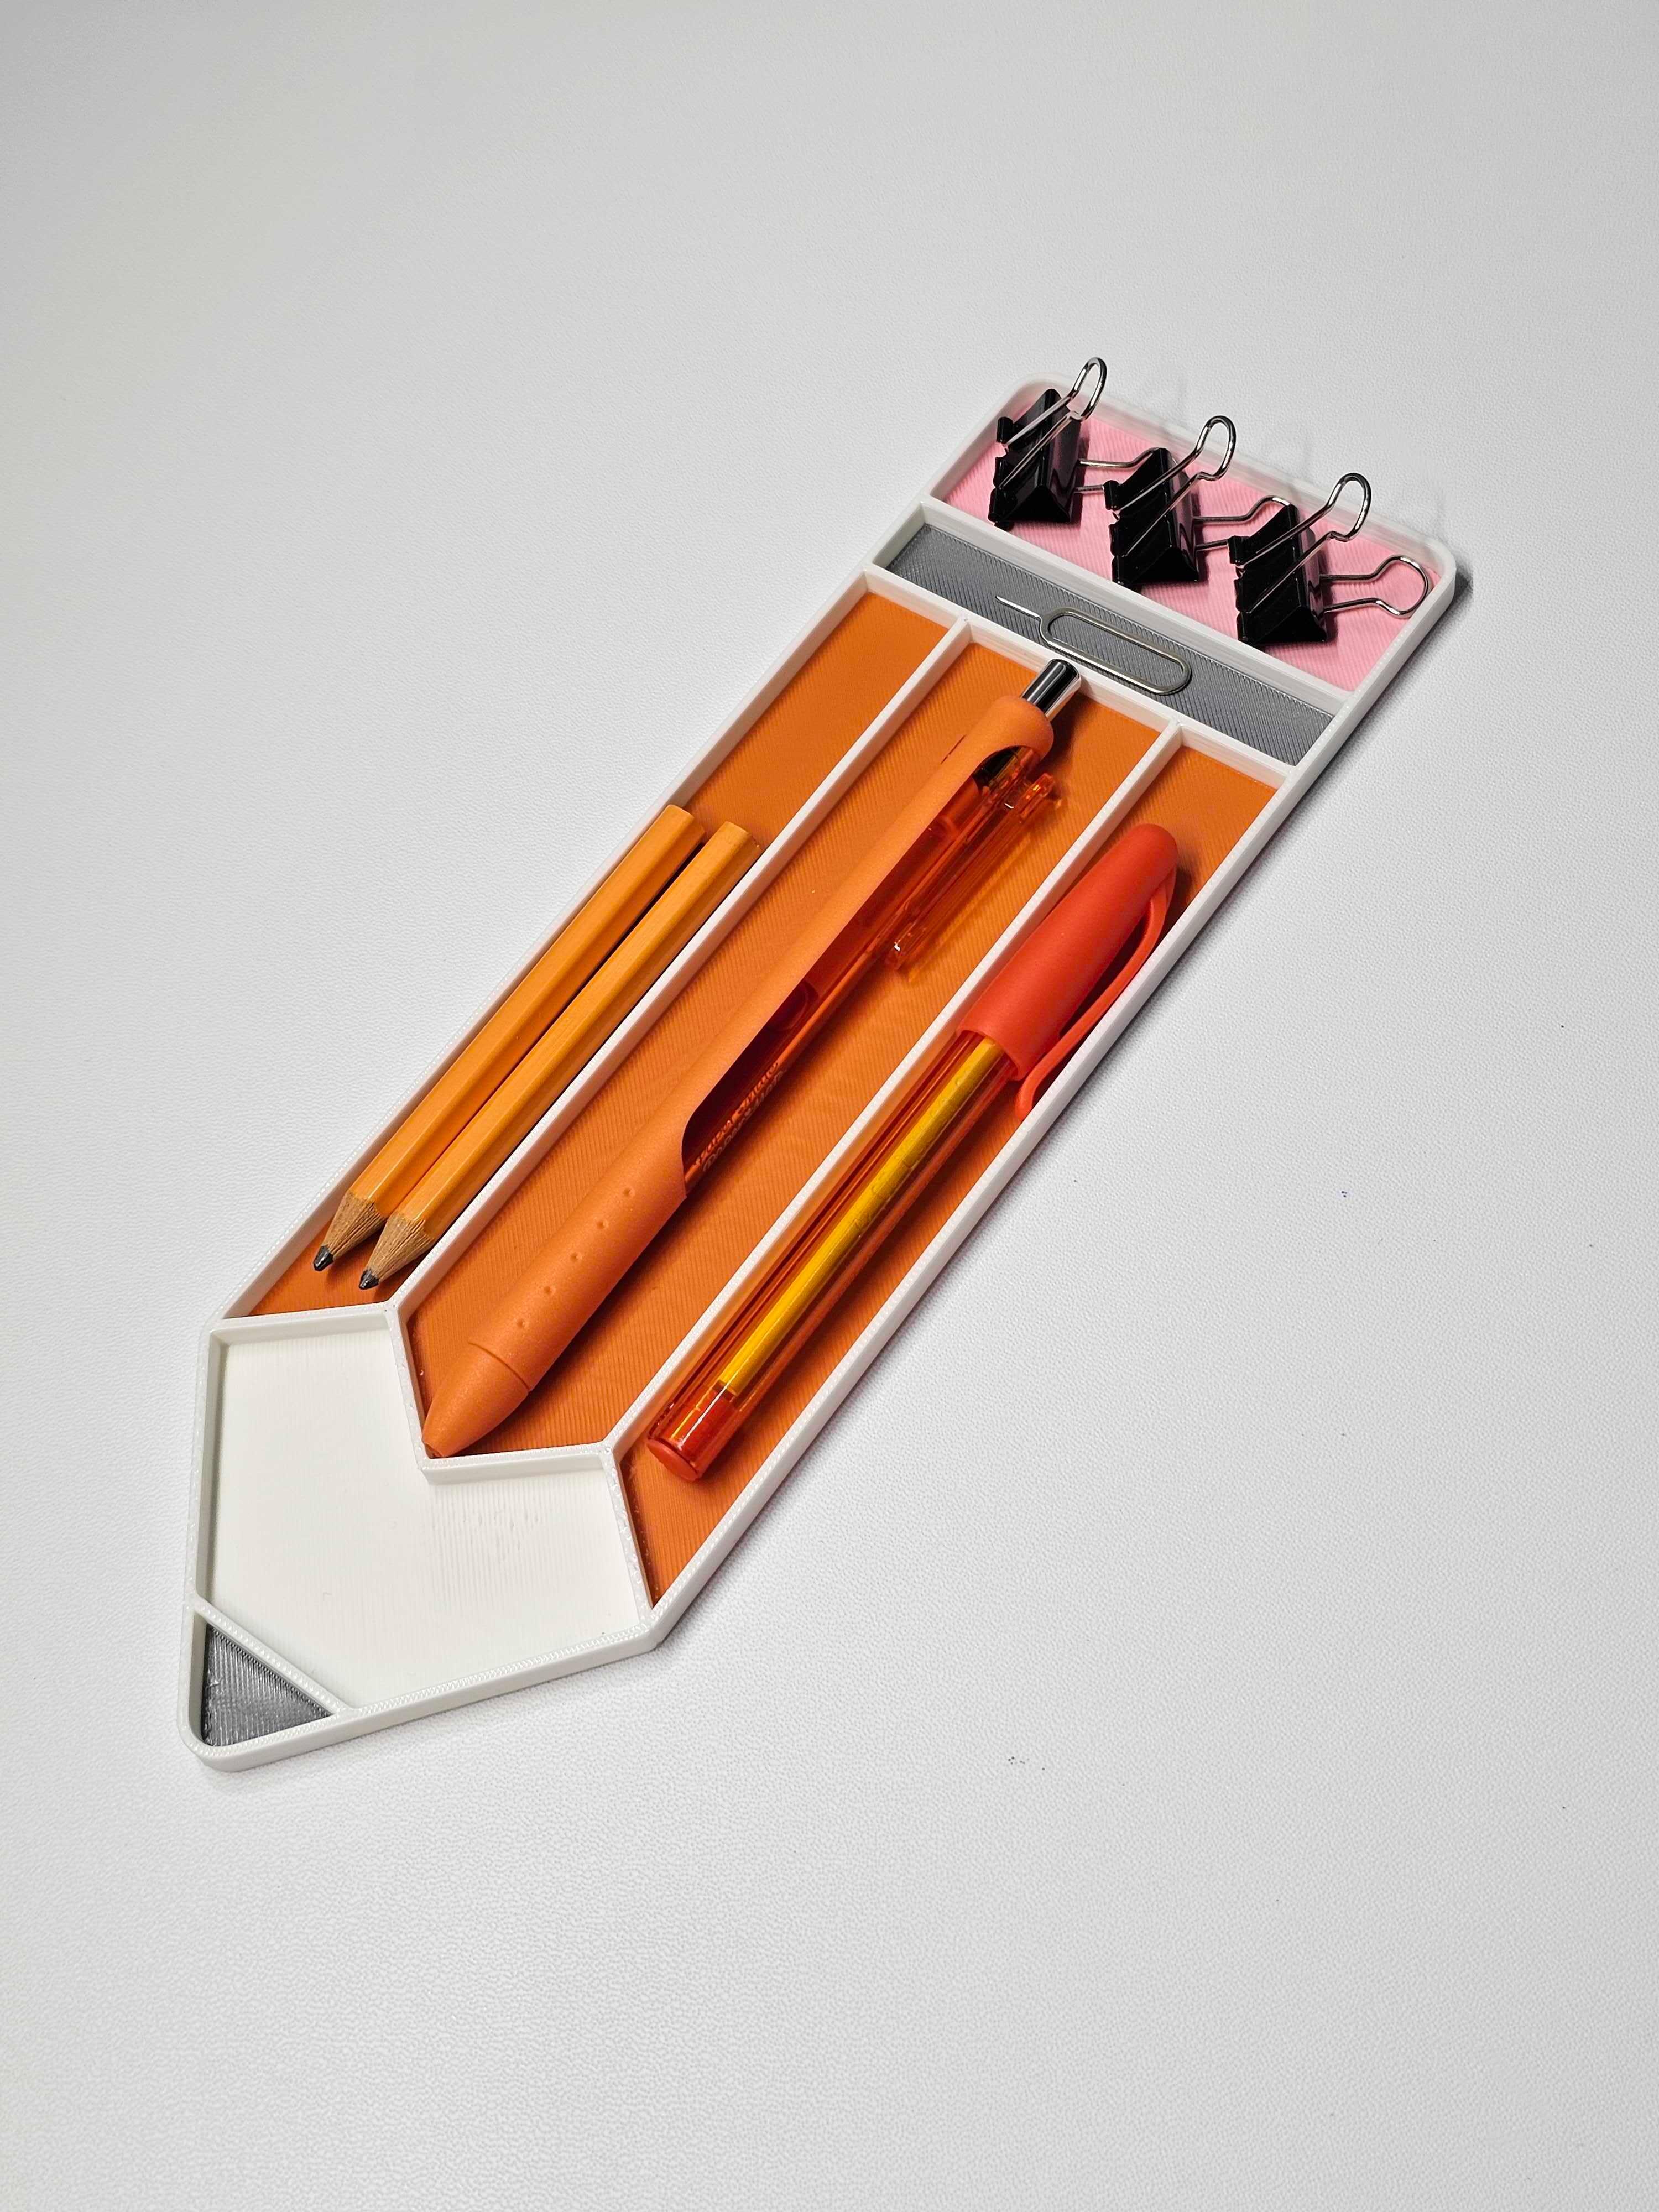 Cute Pencil Tray | 7 compartments | Desk organizer | Add magnets to stick to monitor stand 3d model